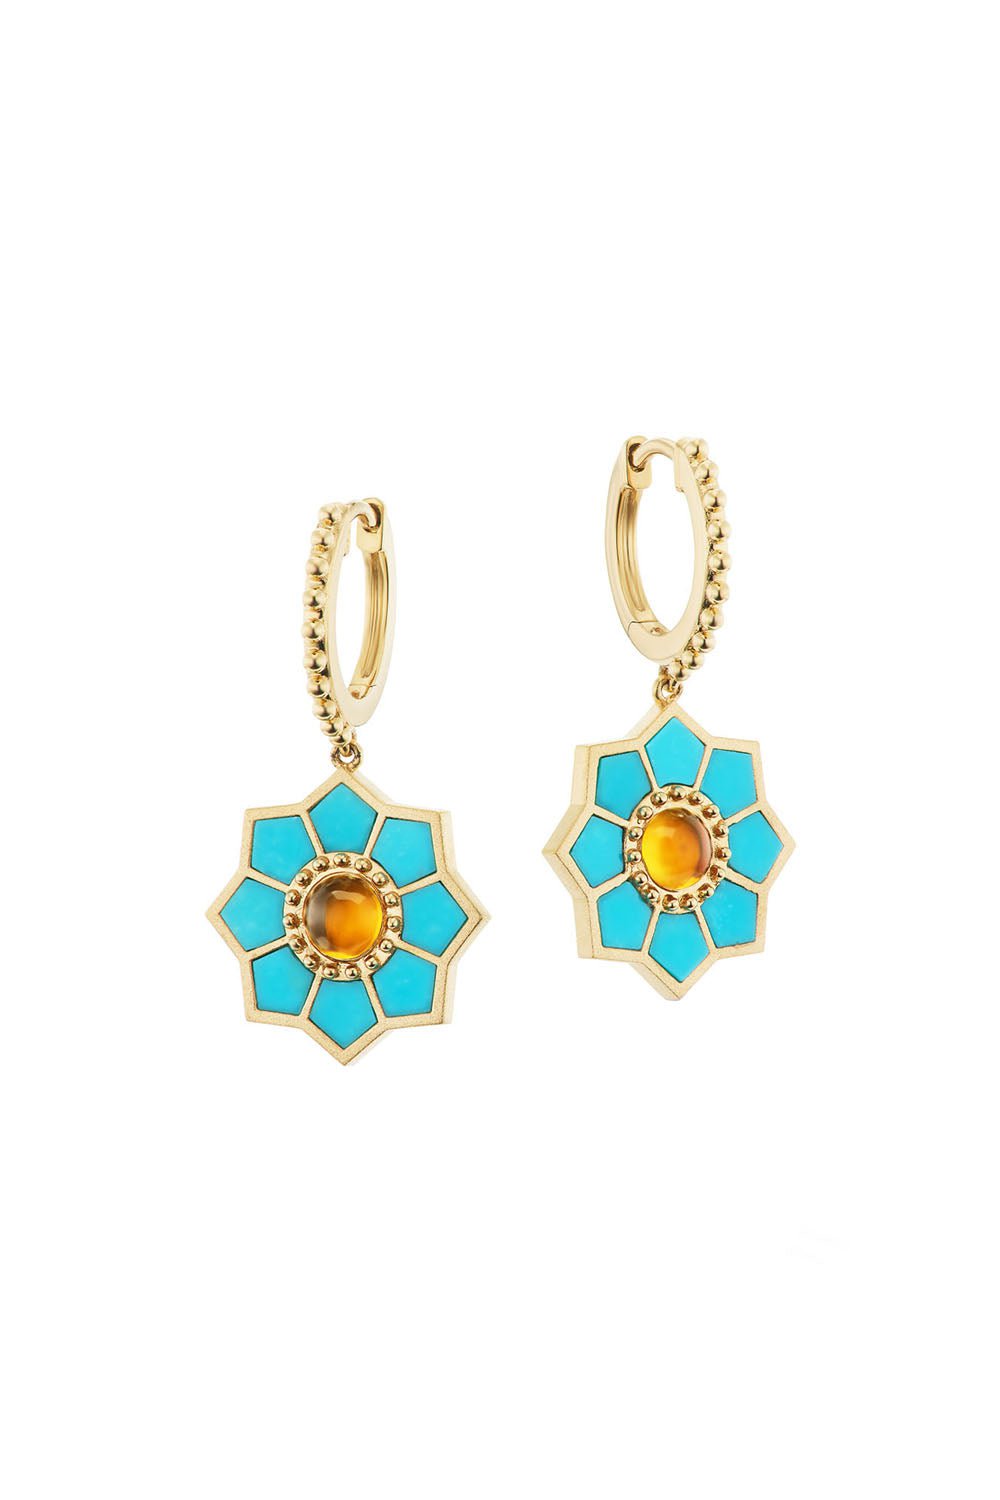 ORLY MARCEL-FEZ TURQUOISE HUGGIE EARRINGS-YELLOW GOLD